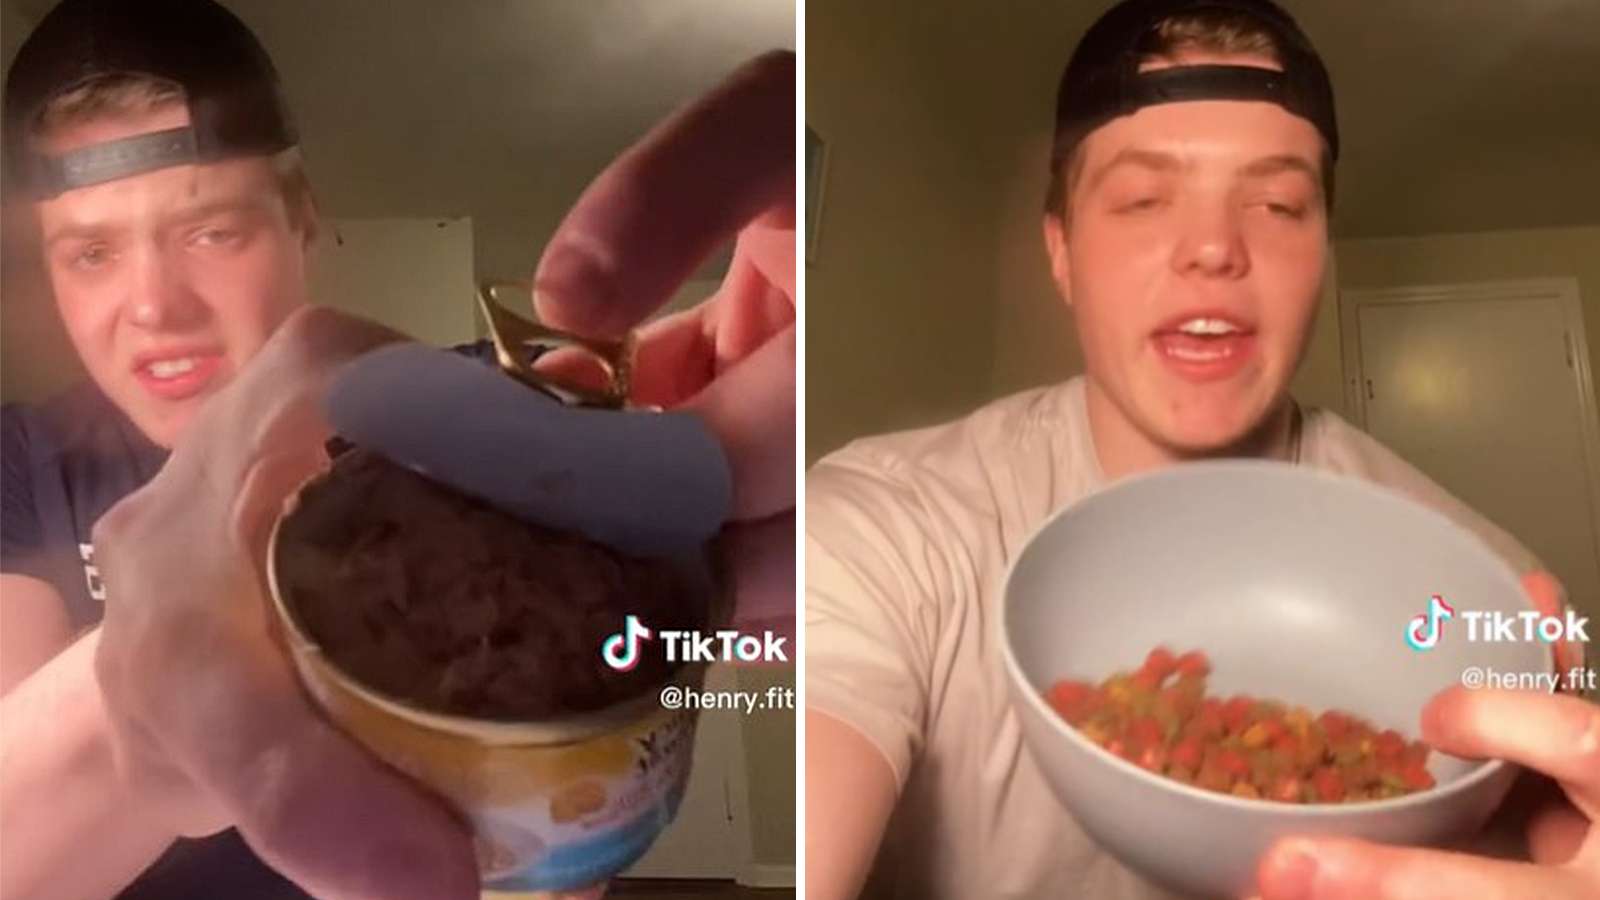 Gym bro eats dog food for protein gains instantly regrets tiktok trend